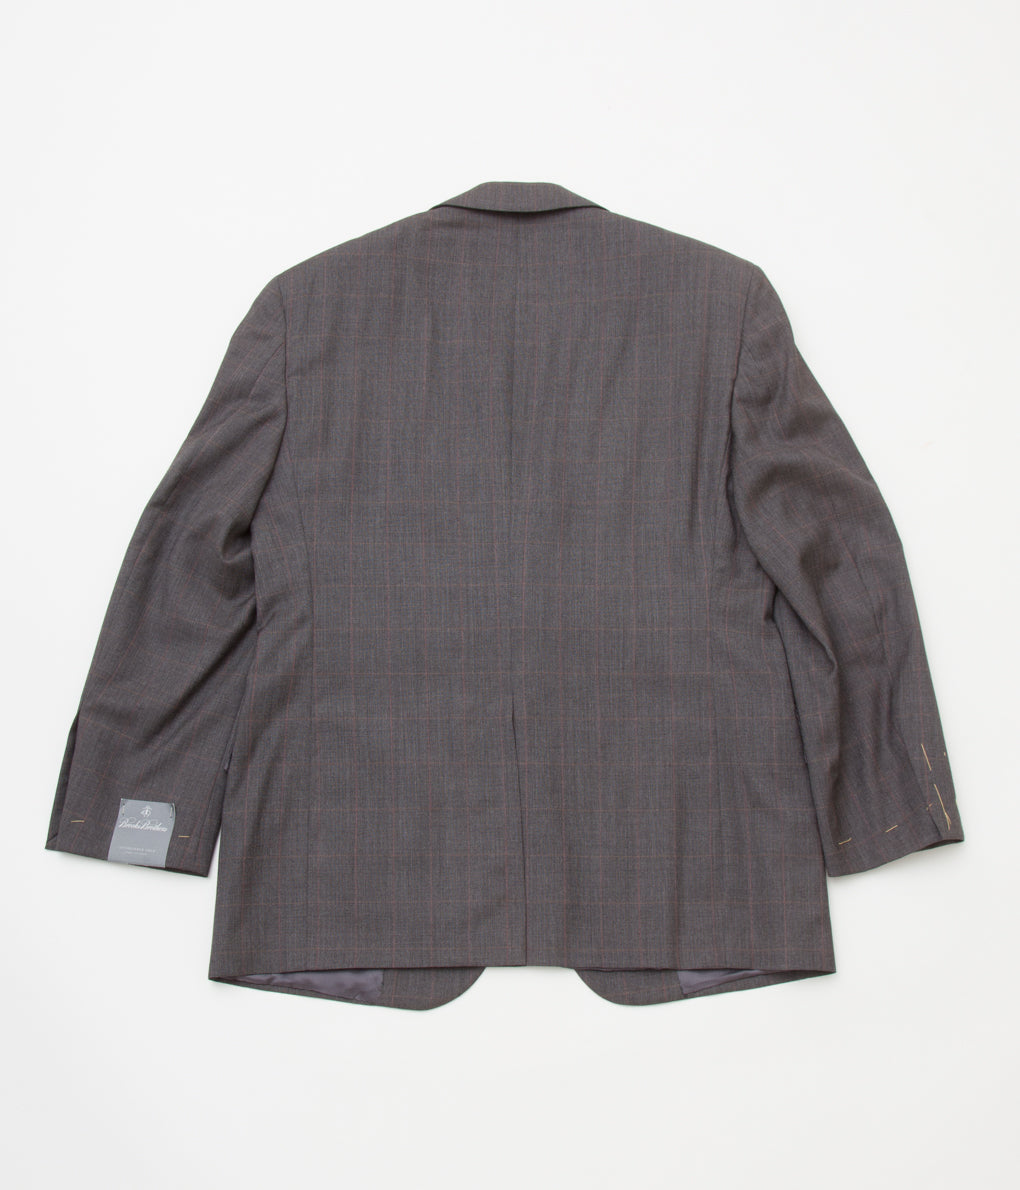 FROM USA "DEAD STOCK BROOKS BROTHERS WOOL SHADOW CHECK SUITS"(CHARCOAL)